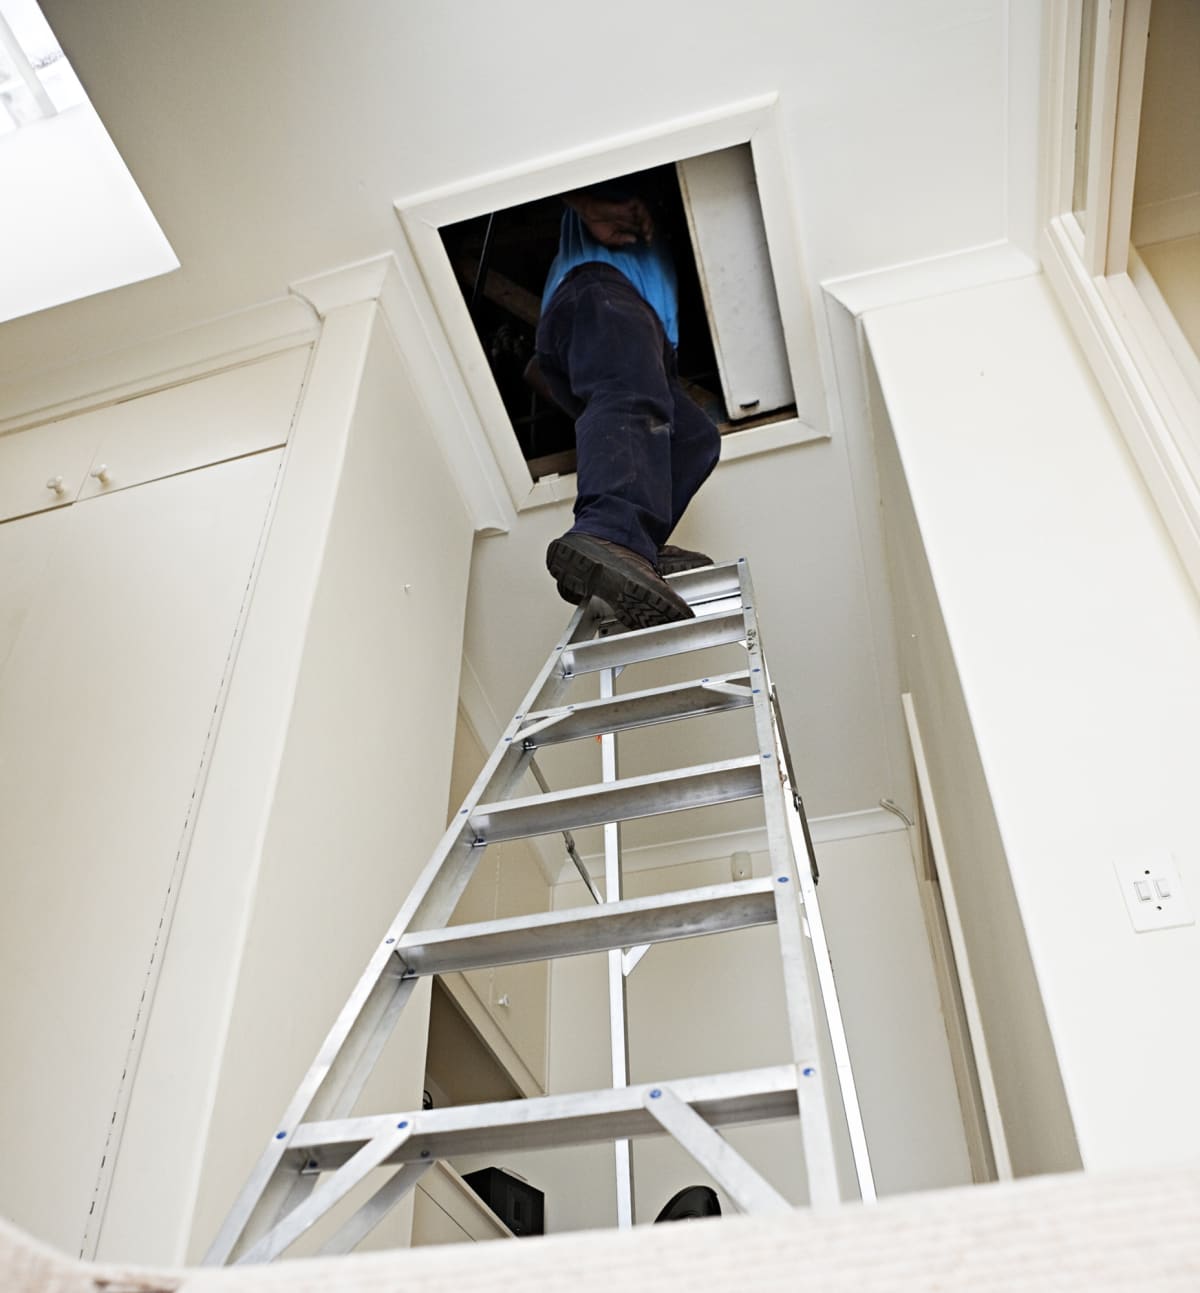 A man heads up a steep ladder into loft or attic space